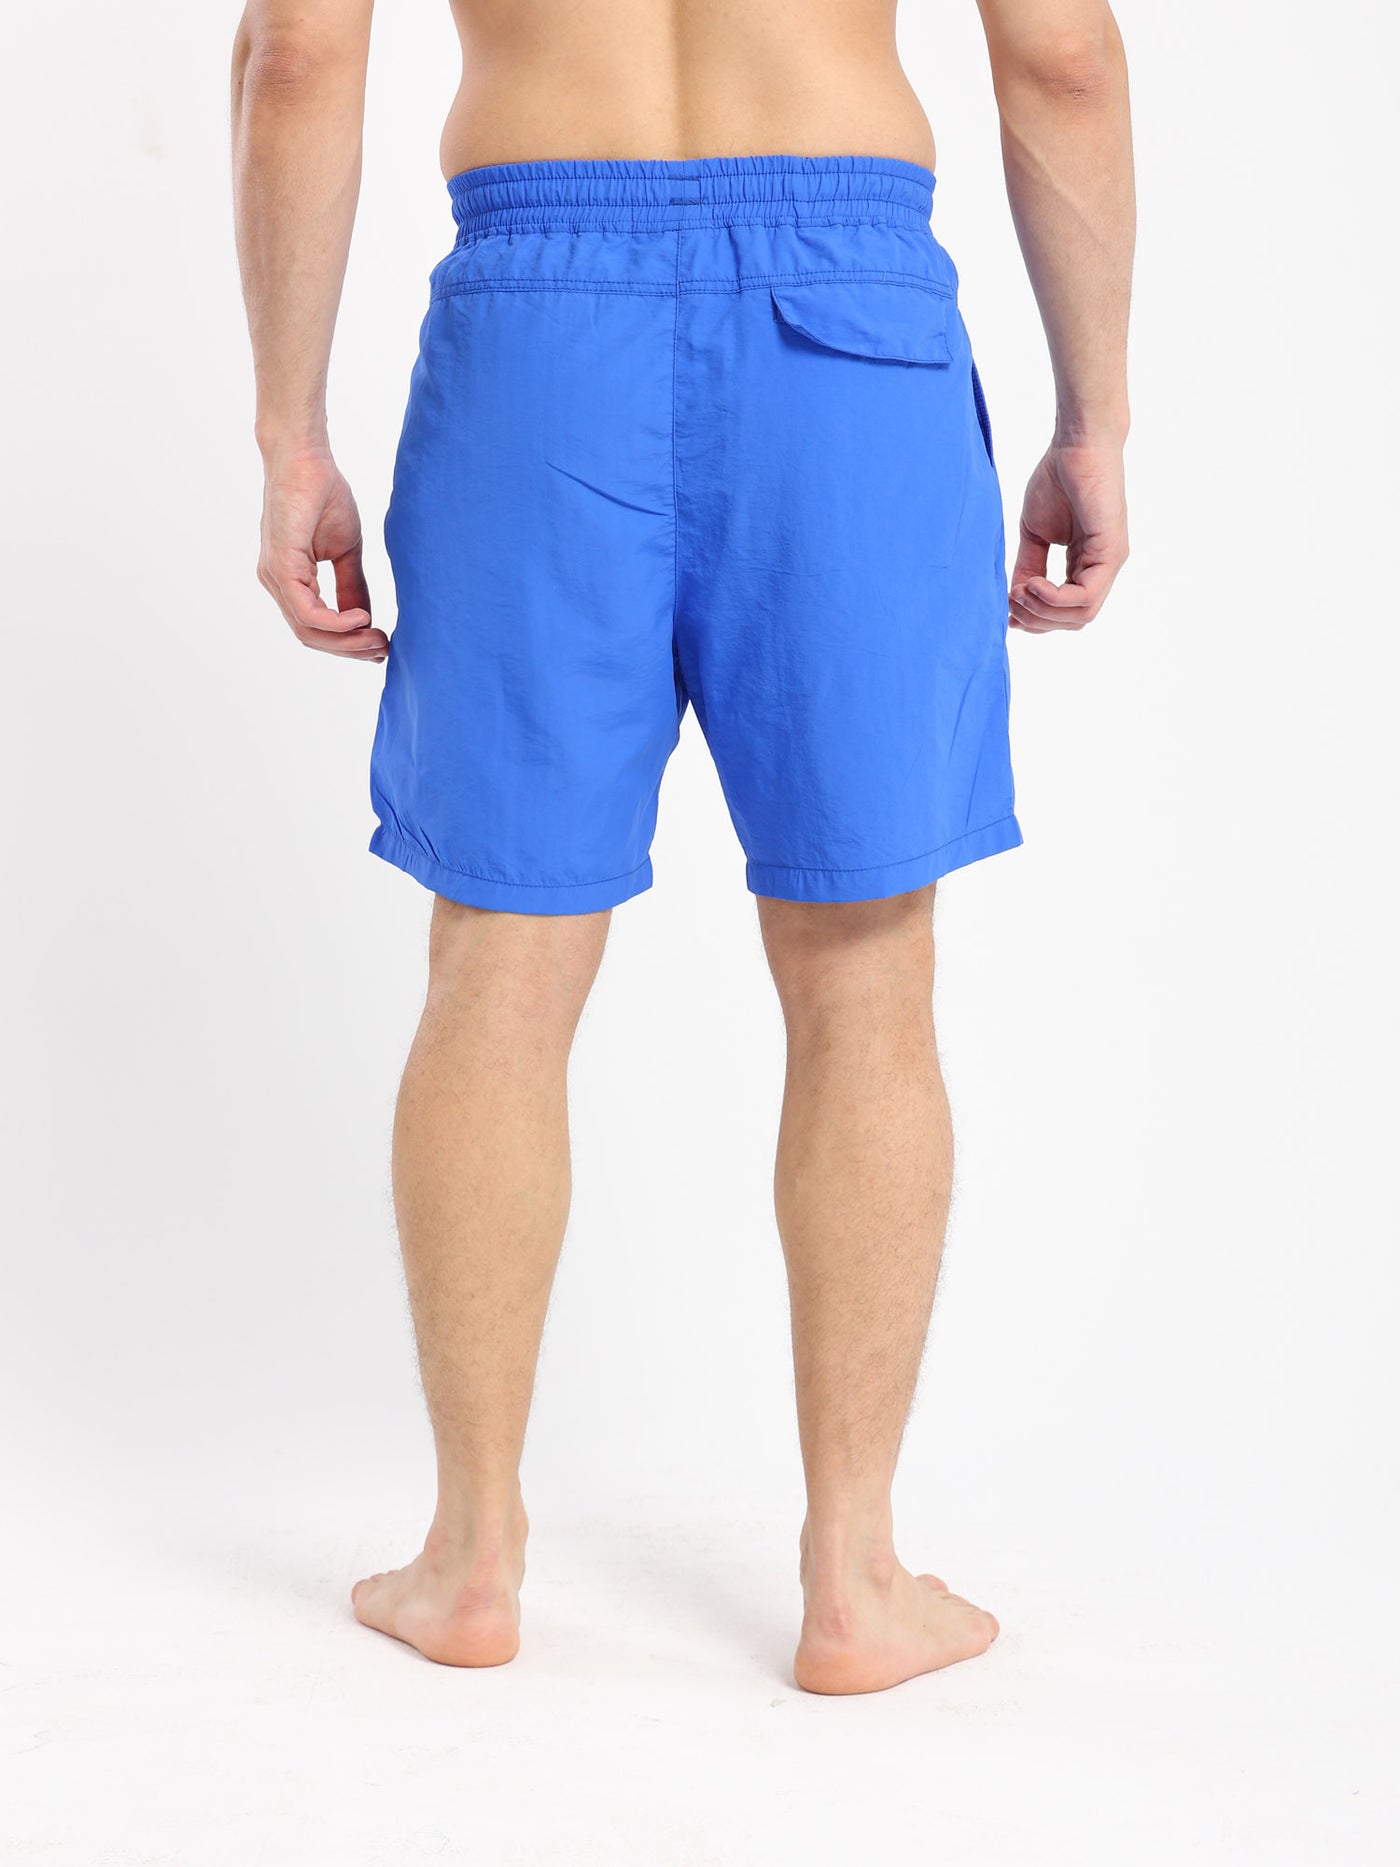 Swimshorts - Above Knee - With Drawstring